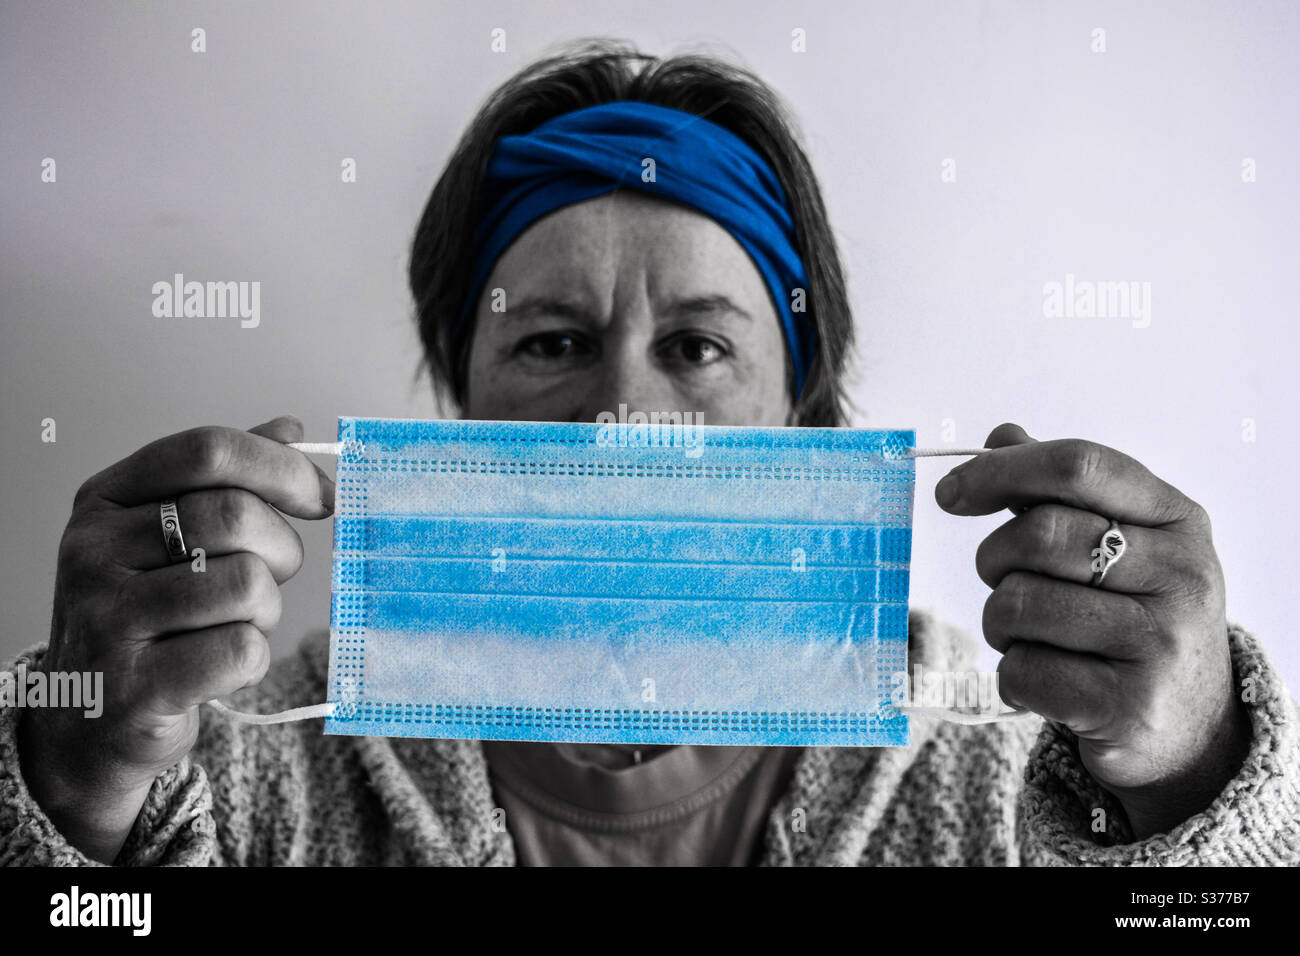 I woman holding up a 3 ply non-surgical face mask with elastic era loops. Selective focus and pop colour blue. Stock Photo